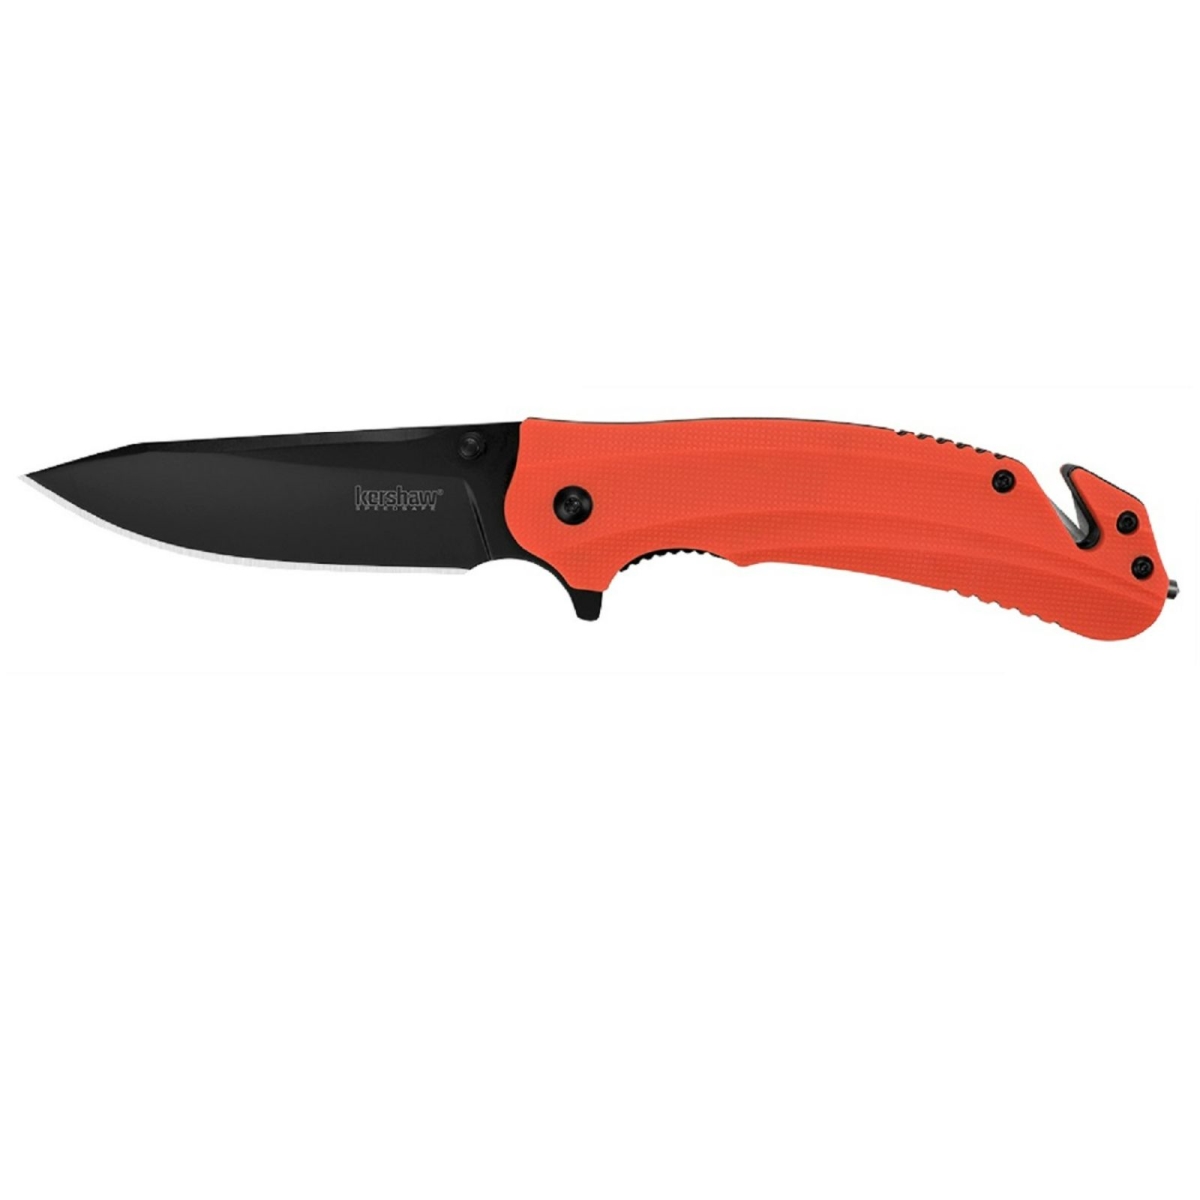 Kershaw 2160269 3.5 in. Barricade Assisted Black Plain Knives with Orange Handle